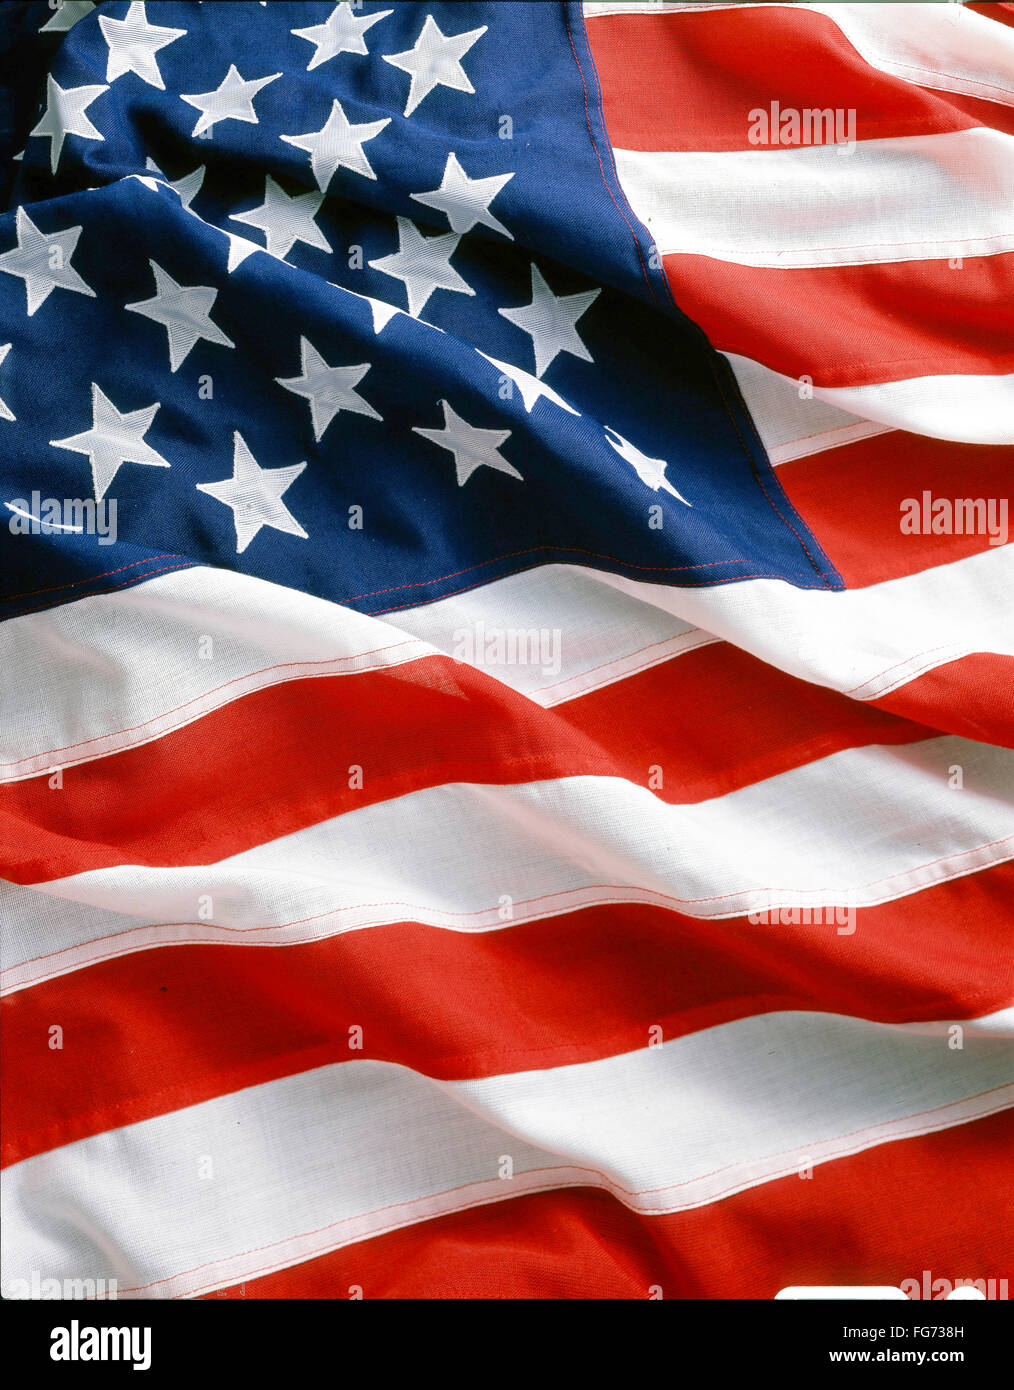 United States of America 'Stars and Stripes' flag in studio setting Stock Photo